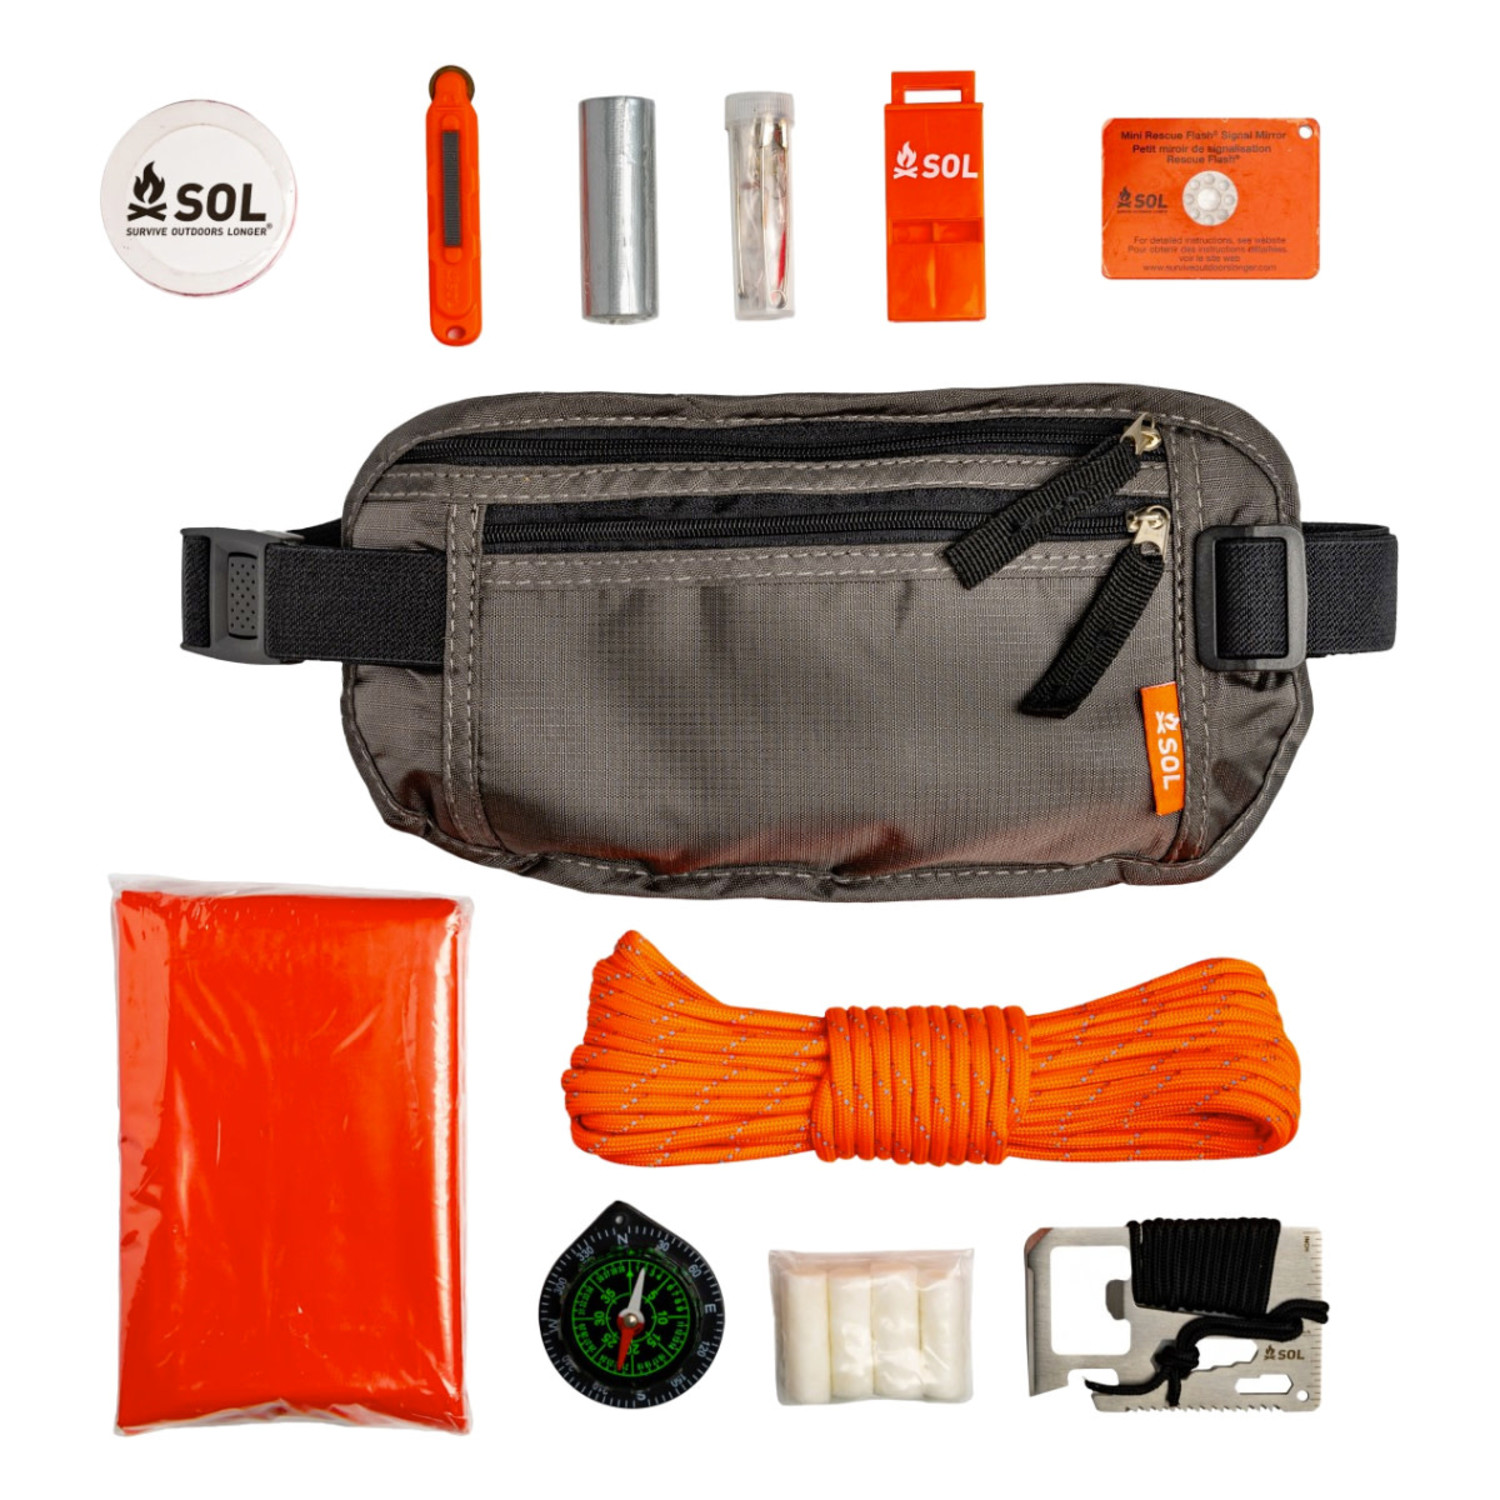 Bug Out Ready? Get Your Kit Together - The Shooter's Log